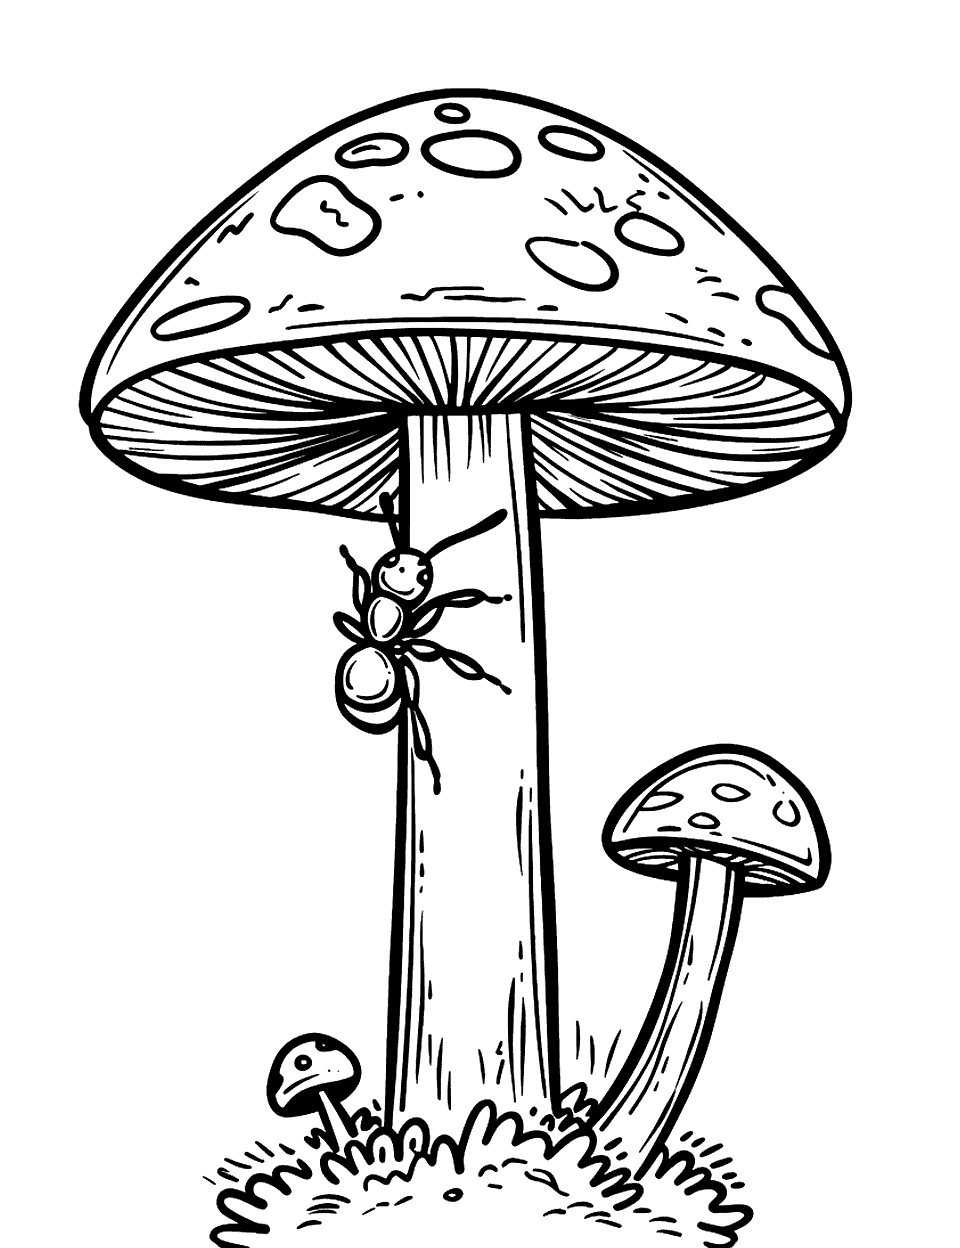 Ant Climbing a Mushroom Coloring Page - An ant struggles up the stalk of a tall mushroom.